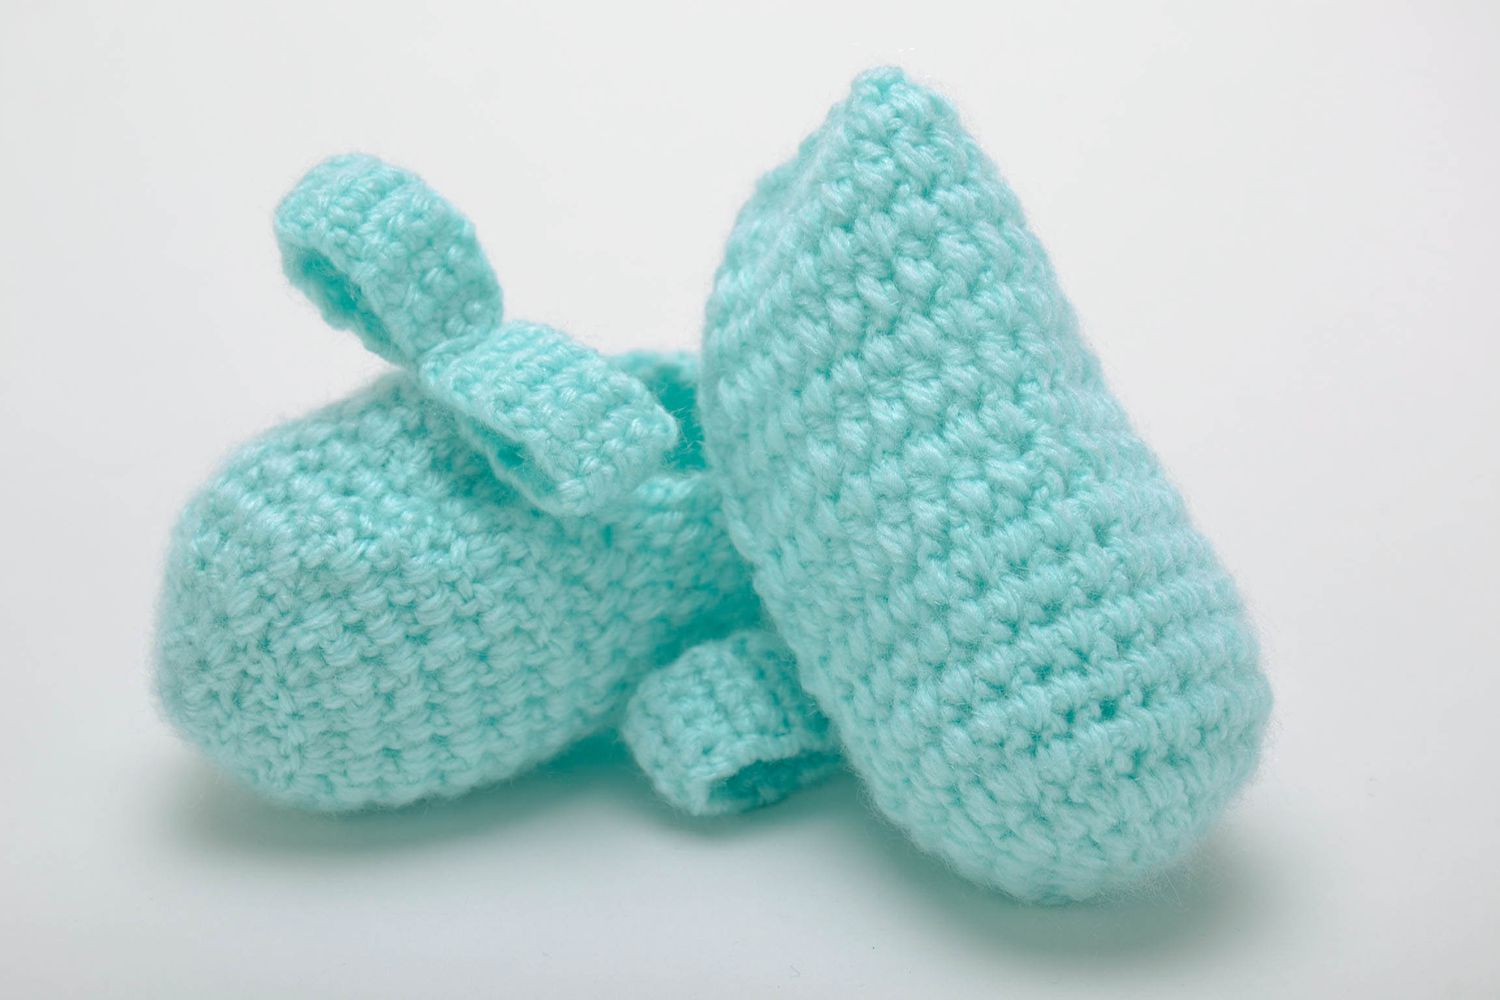 Crocheted babies shoes photo 5